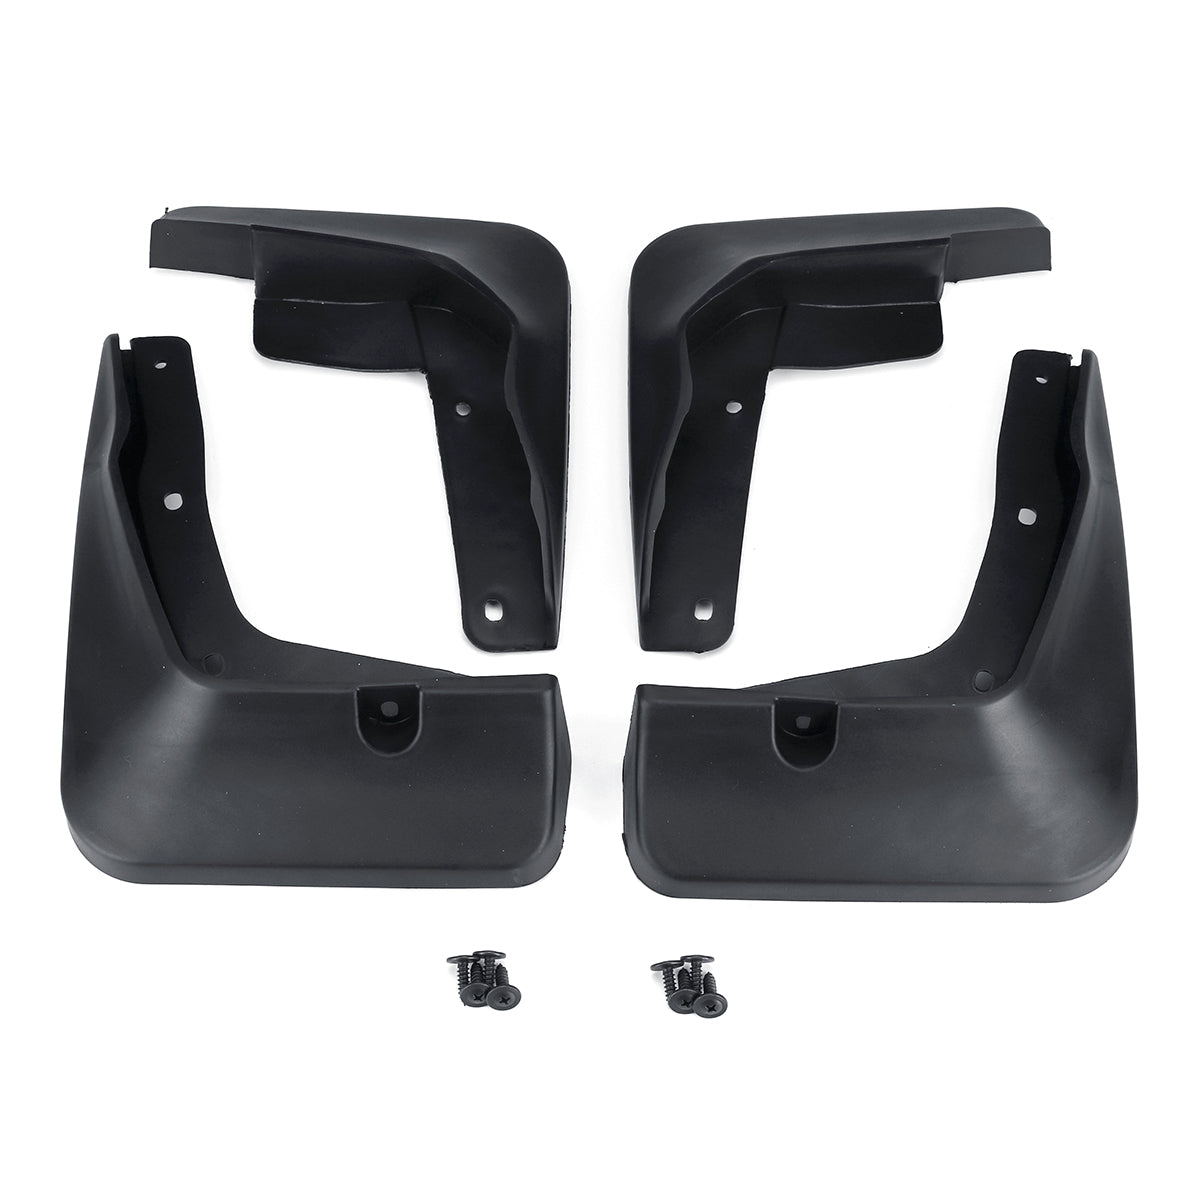 Oshotto Mud Flap (O.E.M Type) For Chevrolet Aveo (Set of 4)